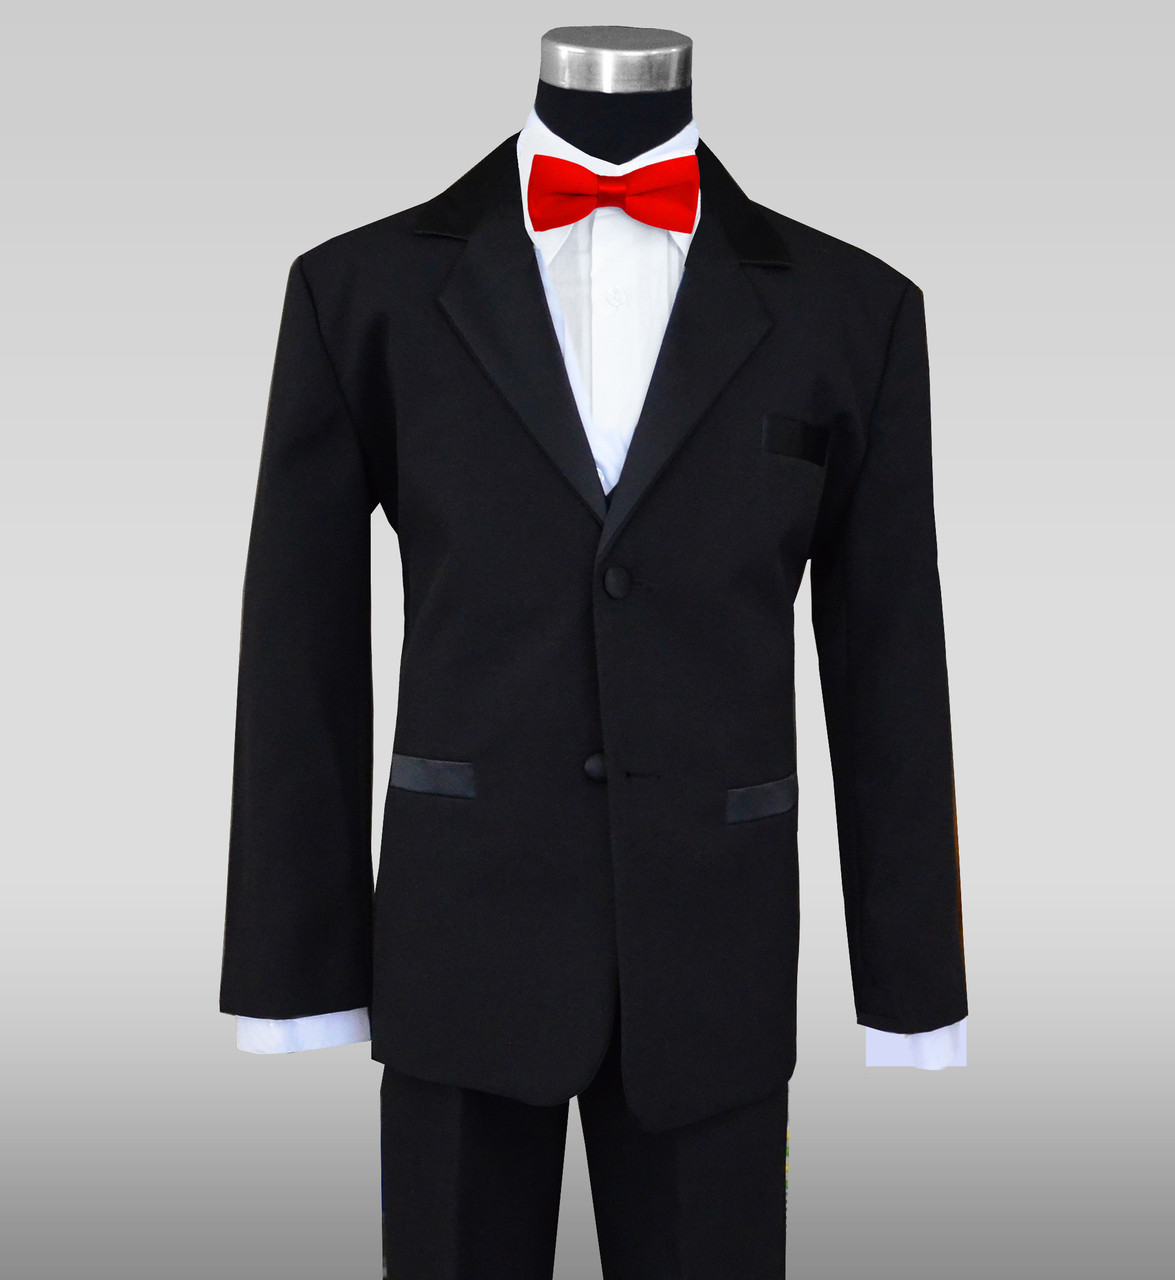 Boys Tuxedos In Black With Red Slim Bow Tie - black tuxedo roblox